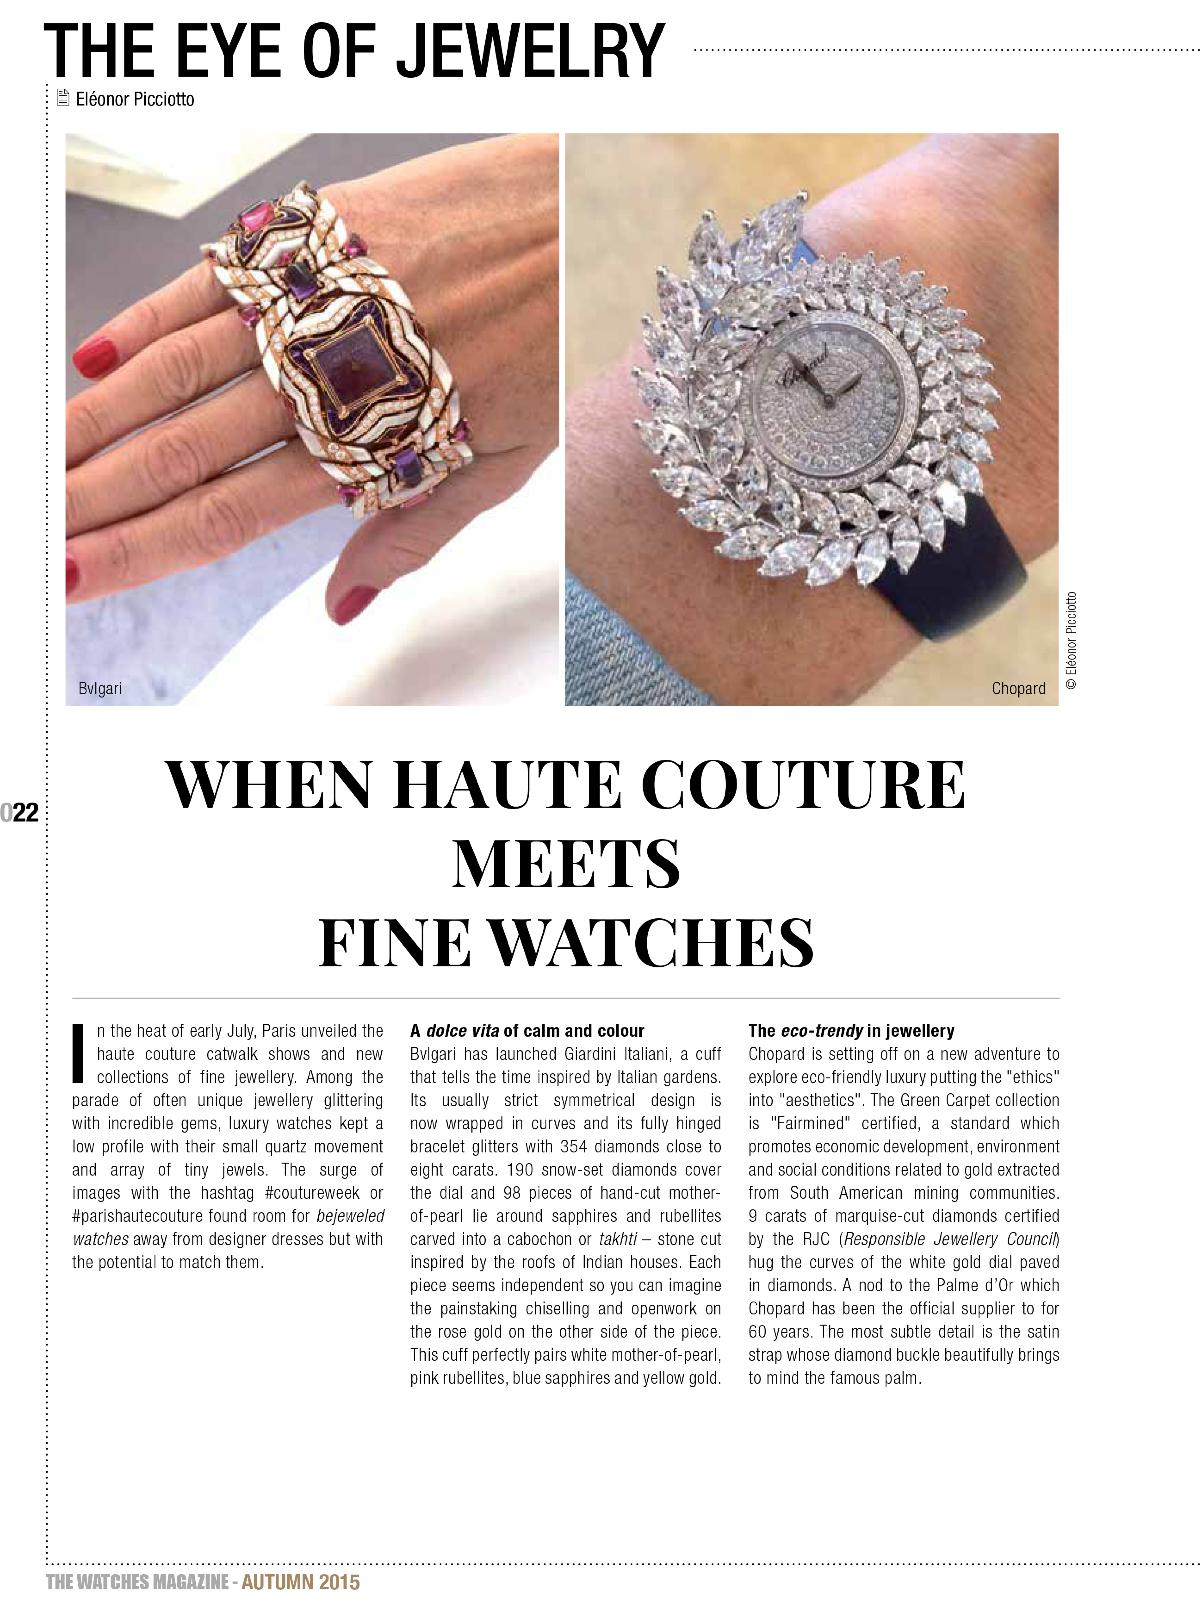 The Watches Magazine 42 the eye of jewelry